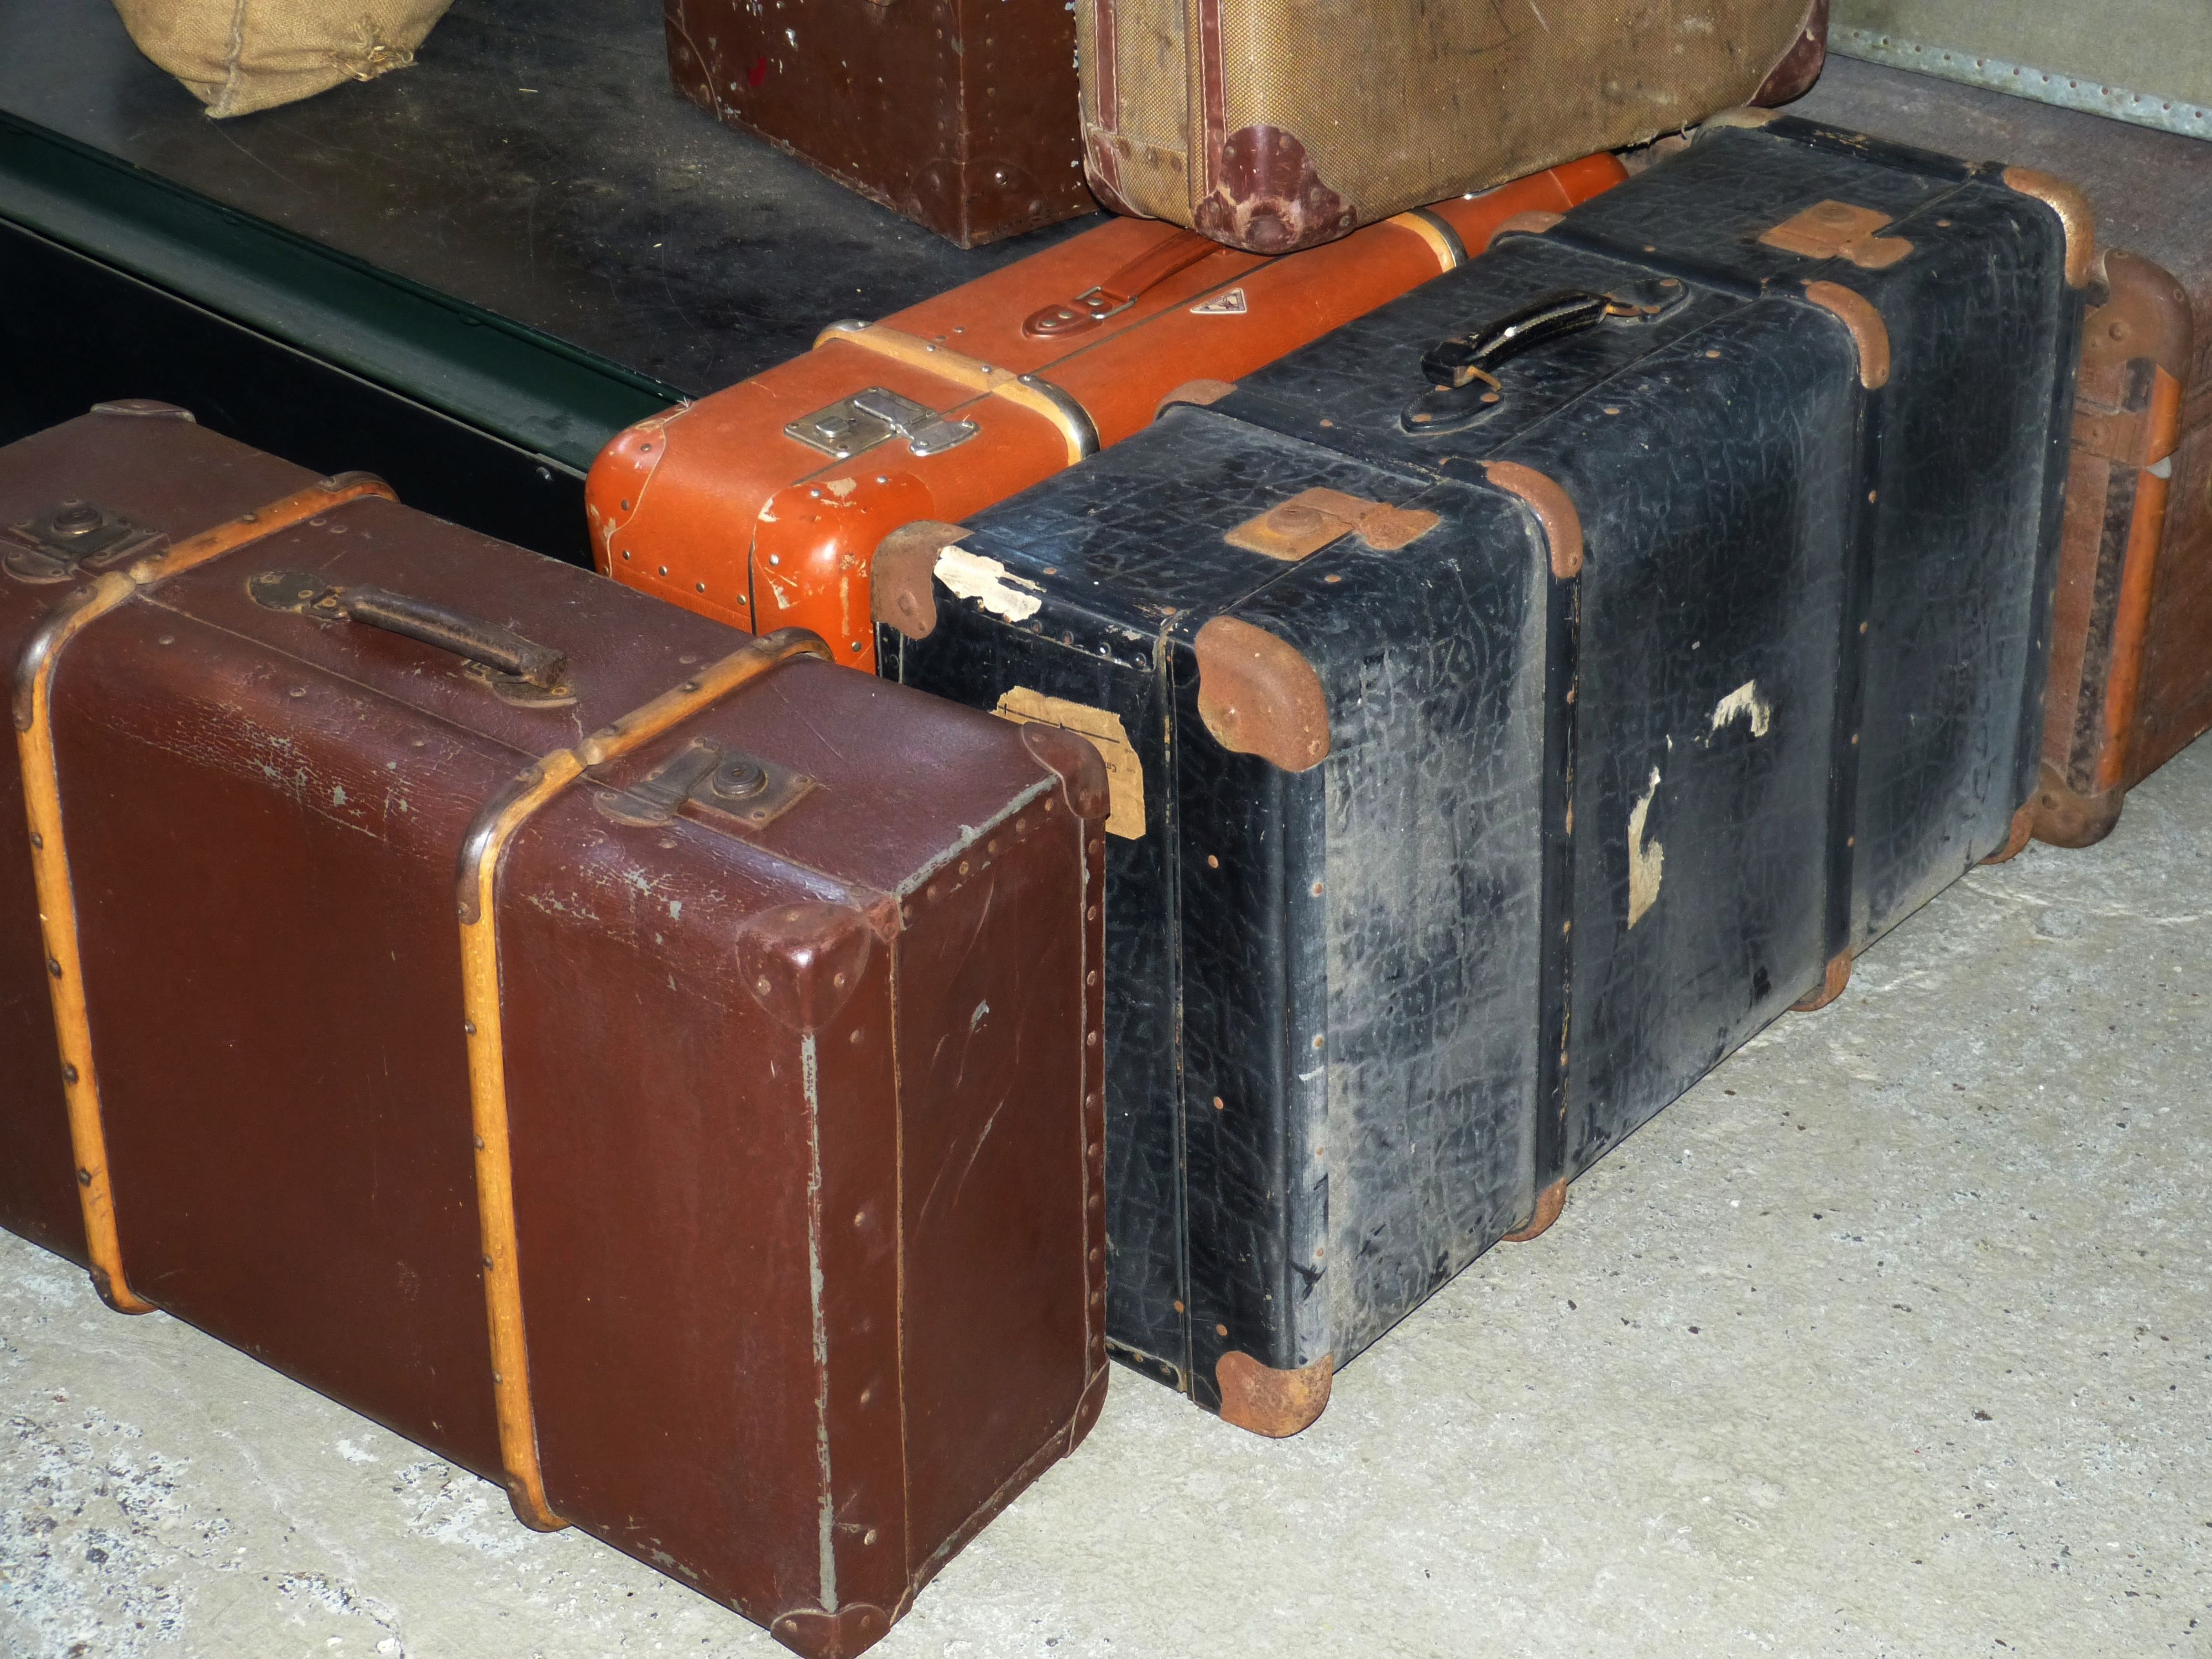 3 brown and black and orange suitcase